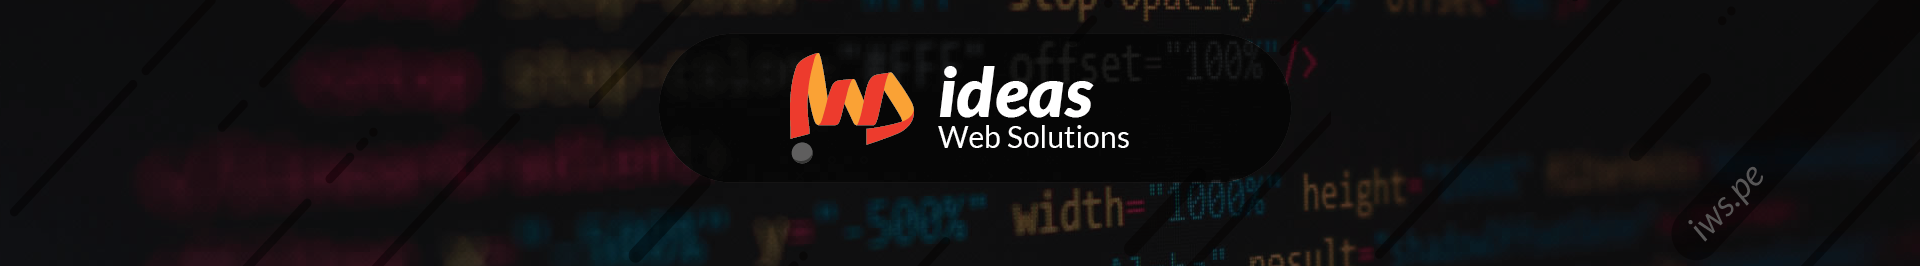 Ideas Web Solutions's profile banner